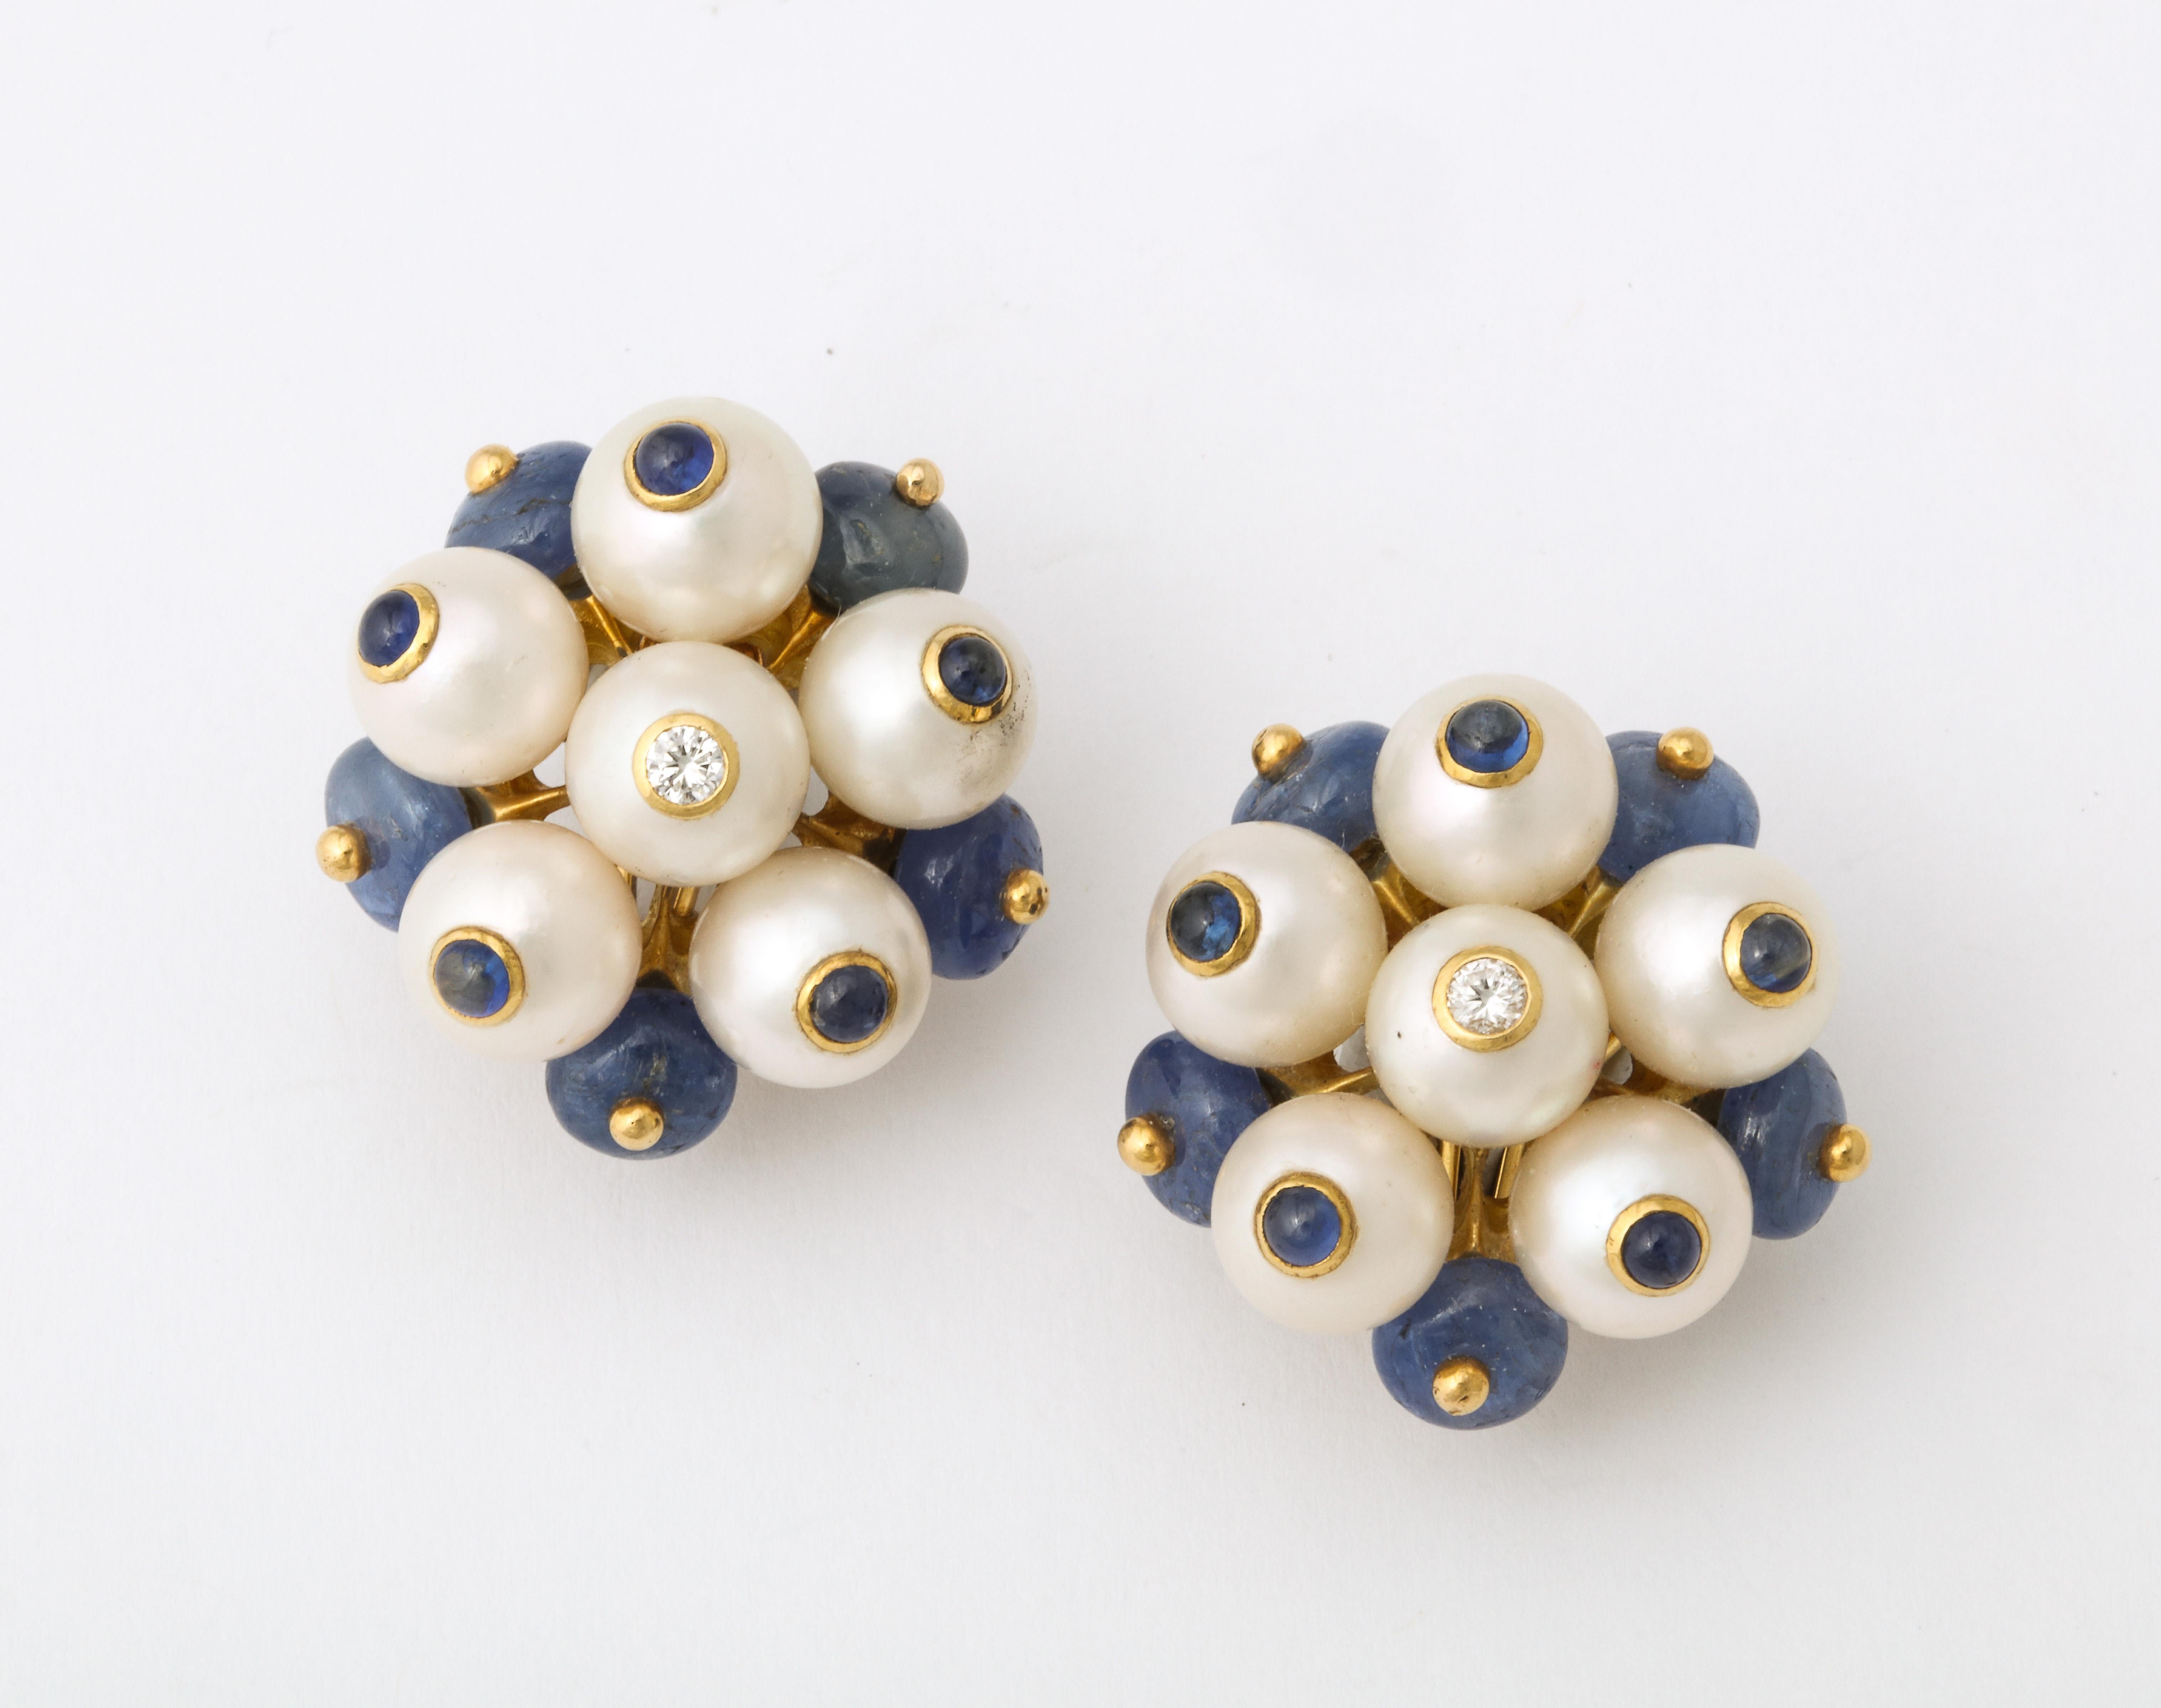 One Pair Of Ladies Clip On Earrings Embelished With Numerous Cabochon Sapphires And Designed With Pearls In A Cluster Style. These Earrings Are Signed Trianon In Which Seaman Schepps Now Owns This Jewelry Company.. Circa 1990's.